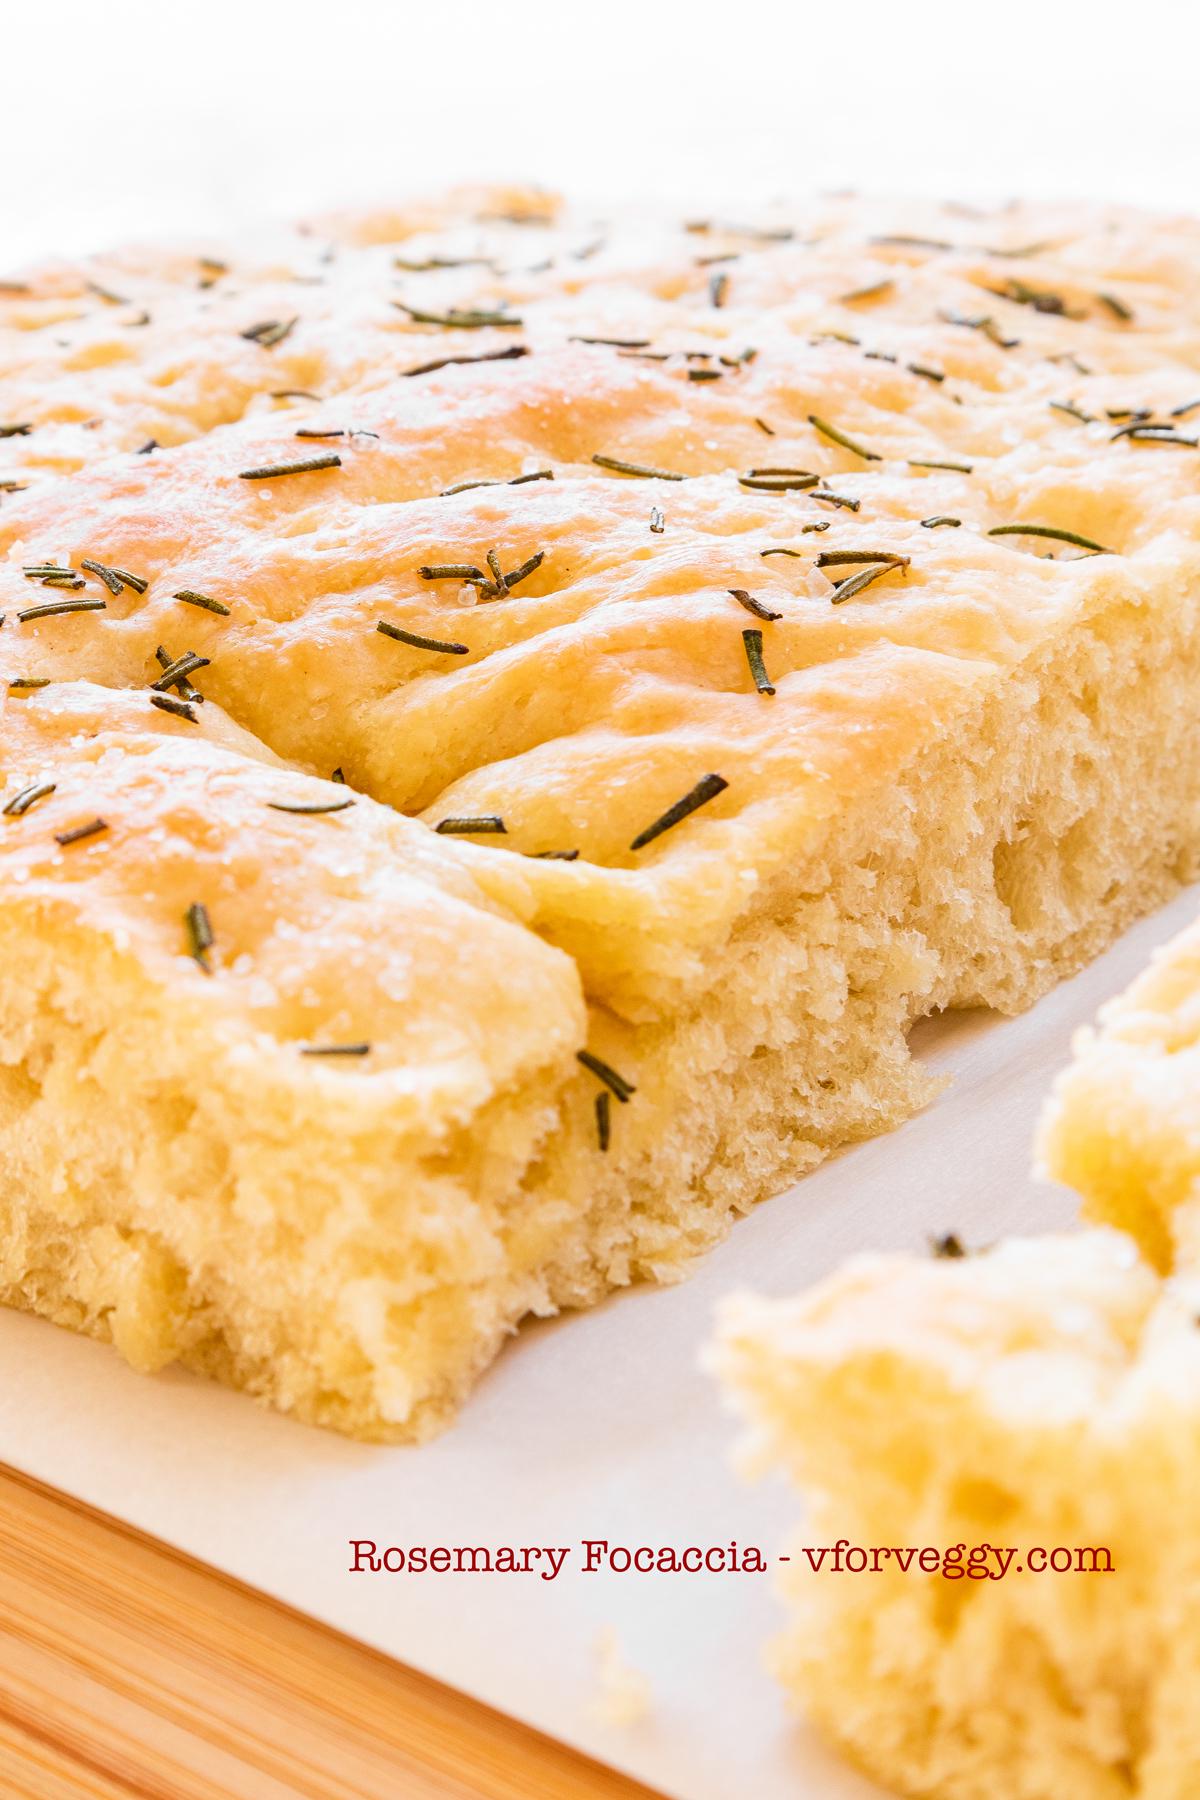 Soft and fluffy rosemary focaccia, with its signature craggy look.